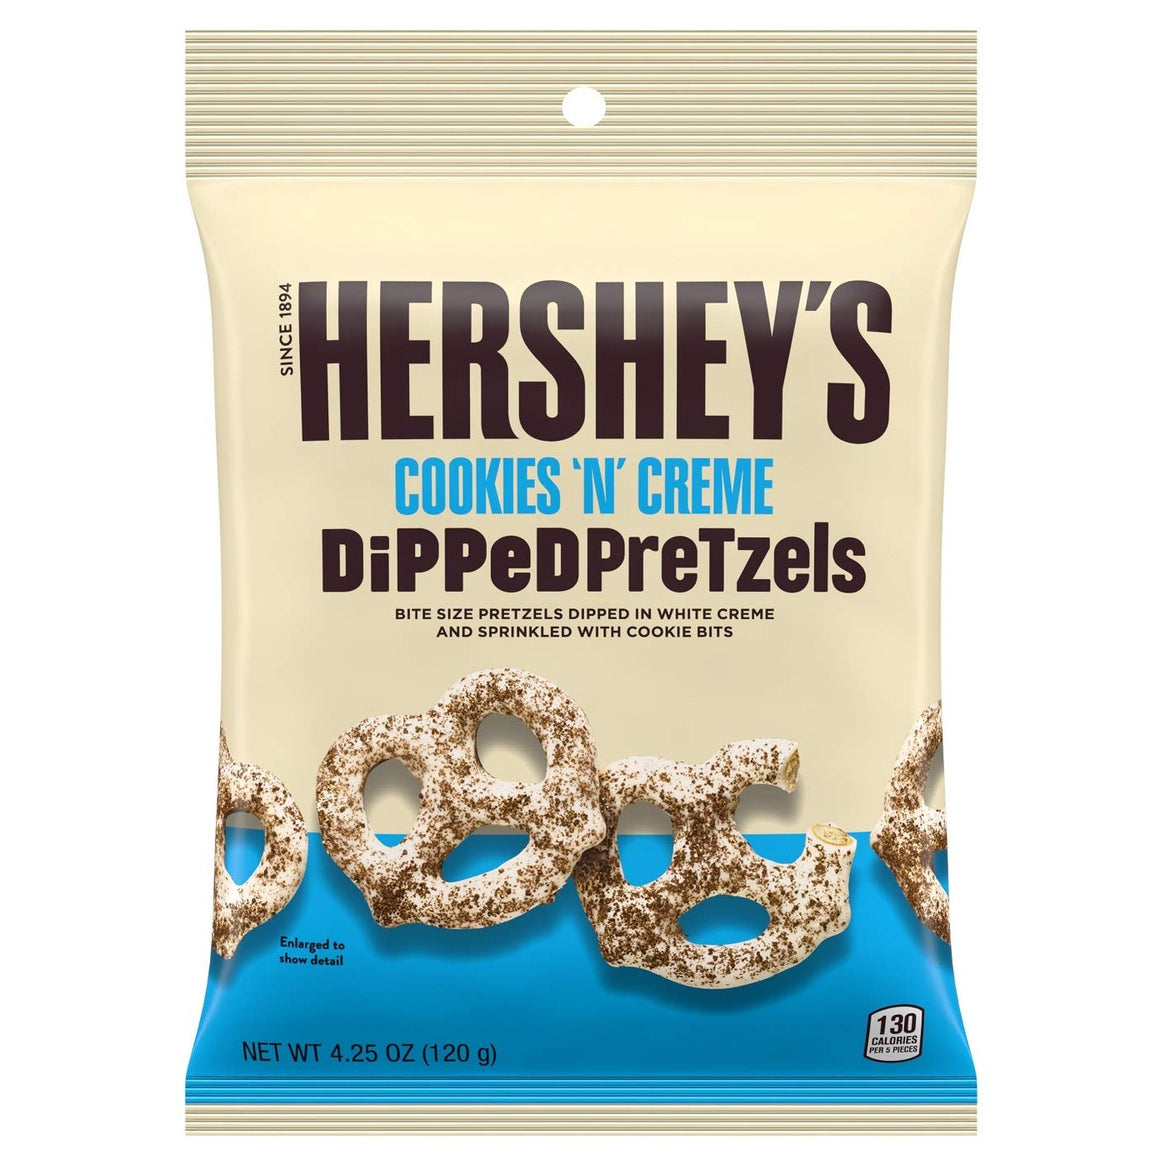 All City Candy Hershey's Cookies 'N' Creme Dipped Pretzels - 4.25-oz. Bag Hershey's For fresh candy and great service, visit www.allcitycandy.com